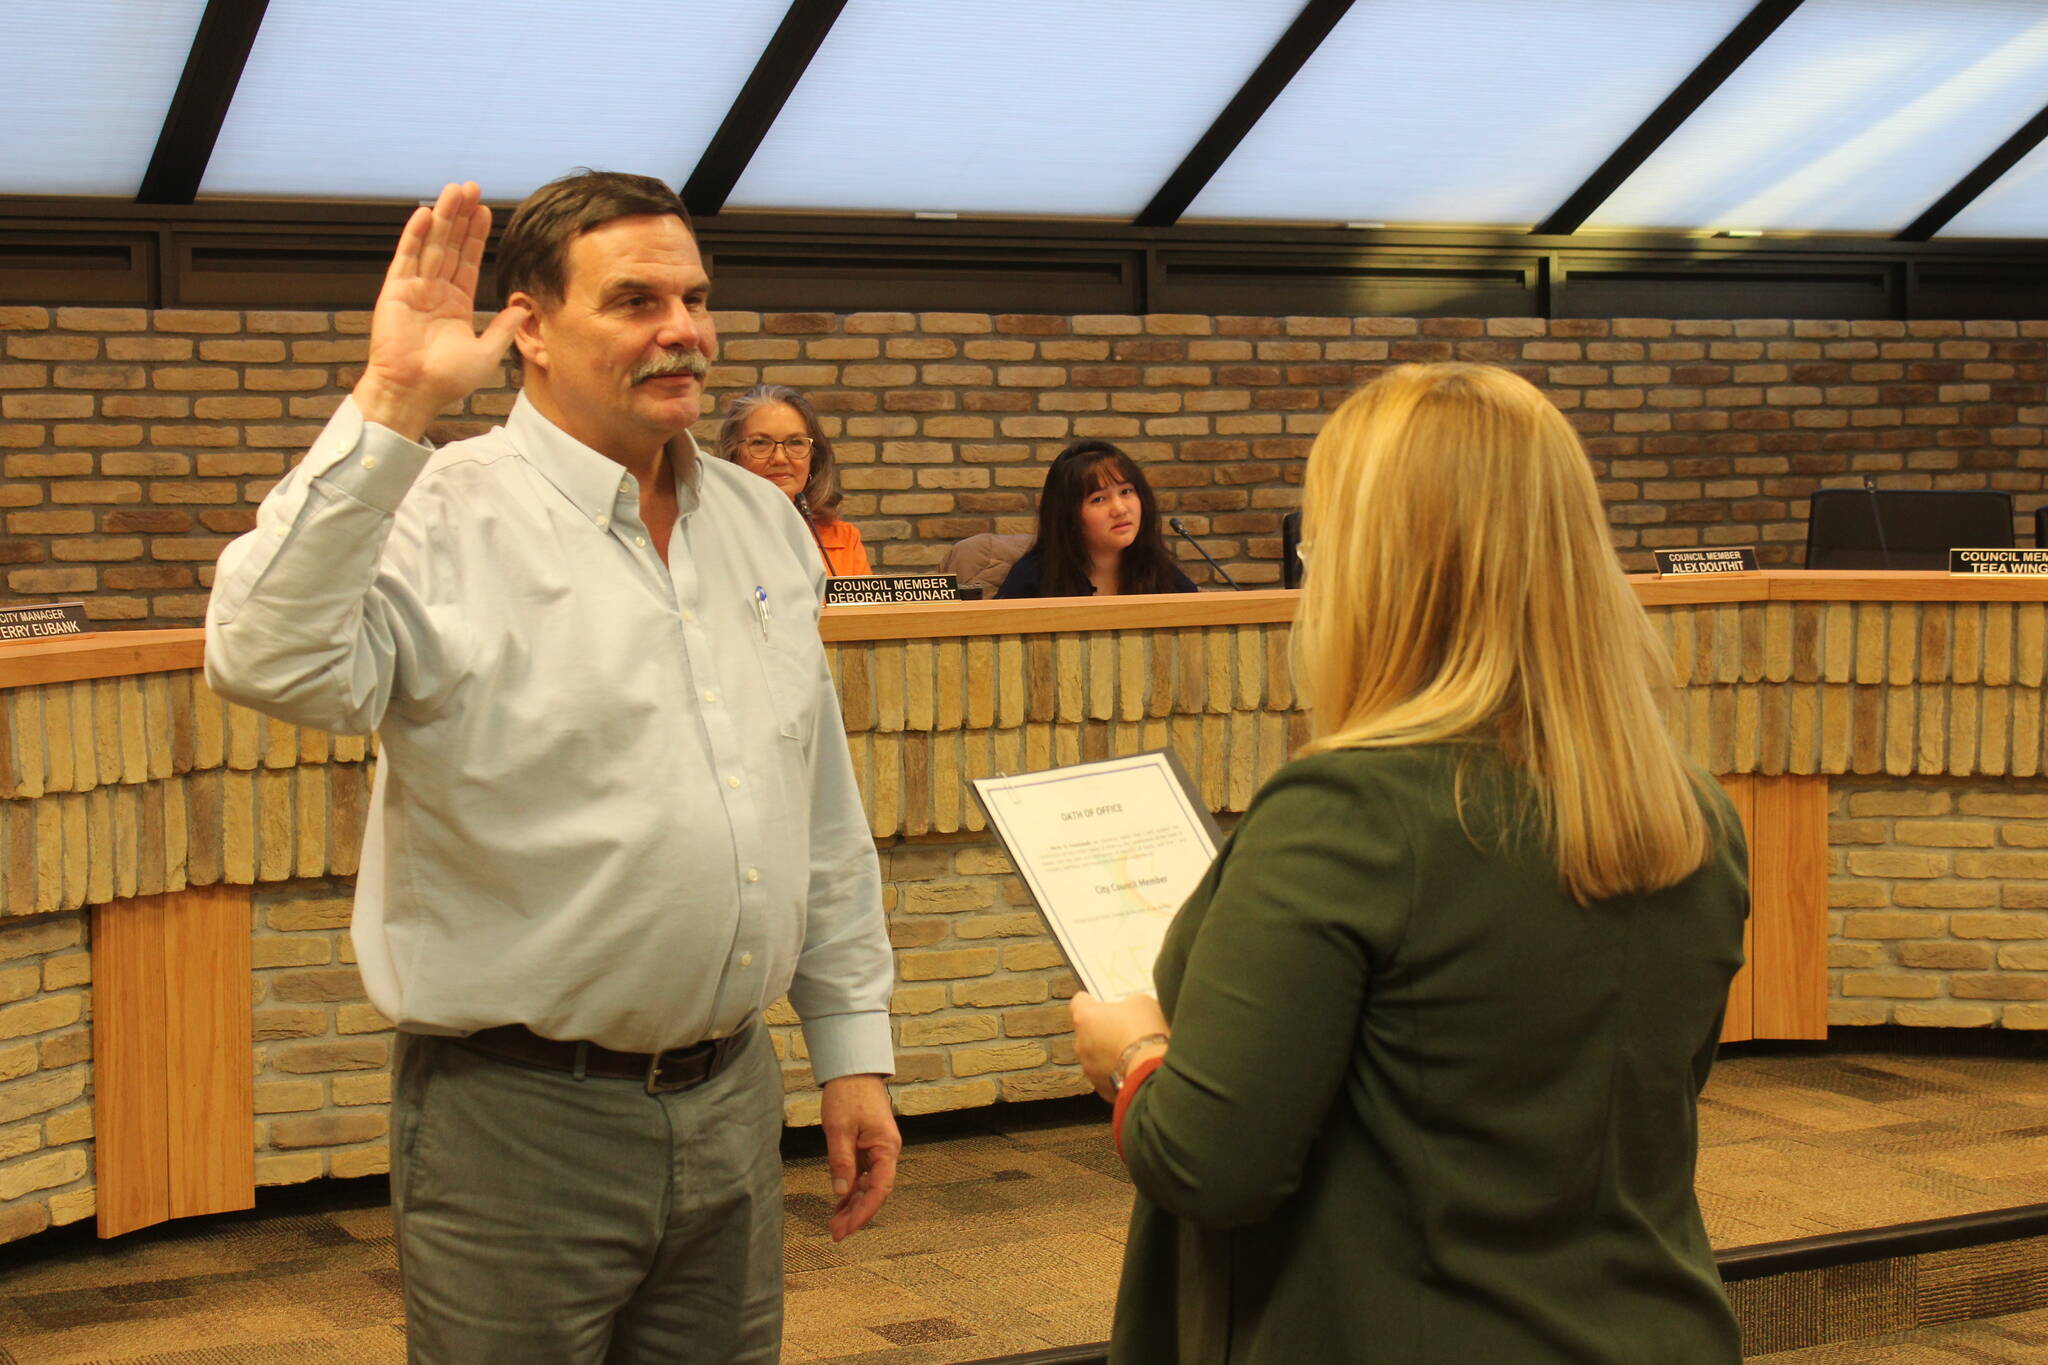 Kenai City Clerk Shellie Saner (right) administers an oath of office to Henry Knackstedt during a Kenai City Council meeting on Thursday, Oct. 19, 2023 in Kenai, Alaska. Knackstedt was elected to the council during the Oct. 3 election. (Ashlyn O’Hara/Peninsula Clarion)